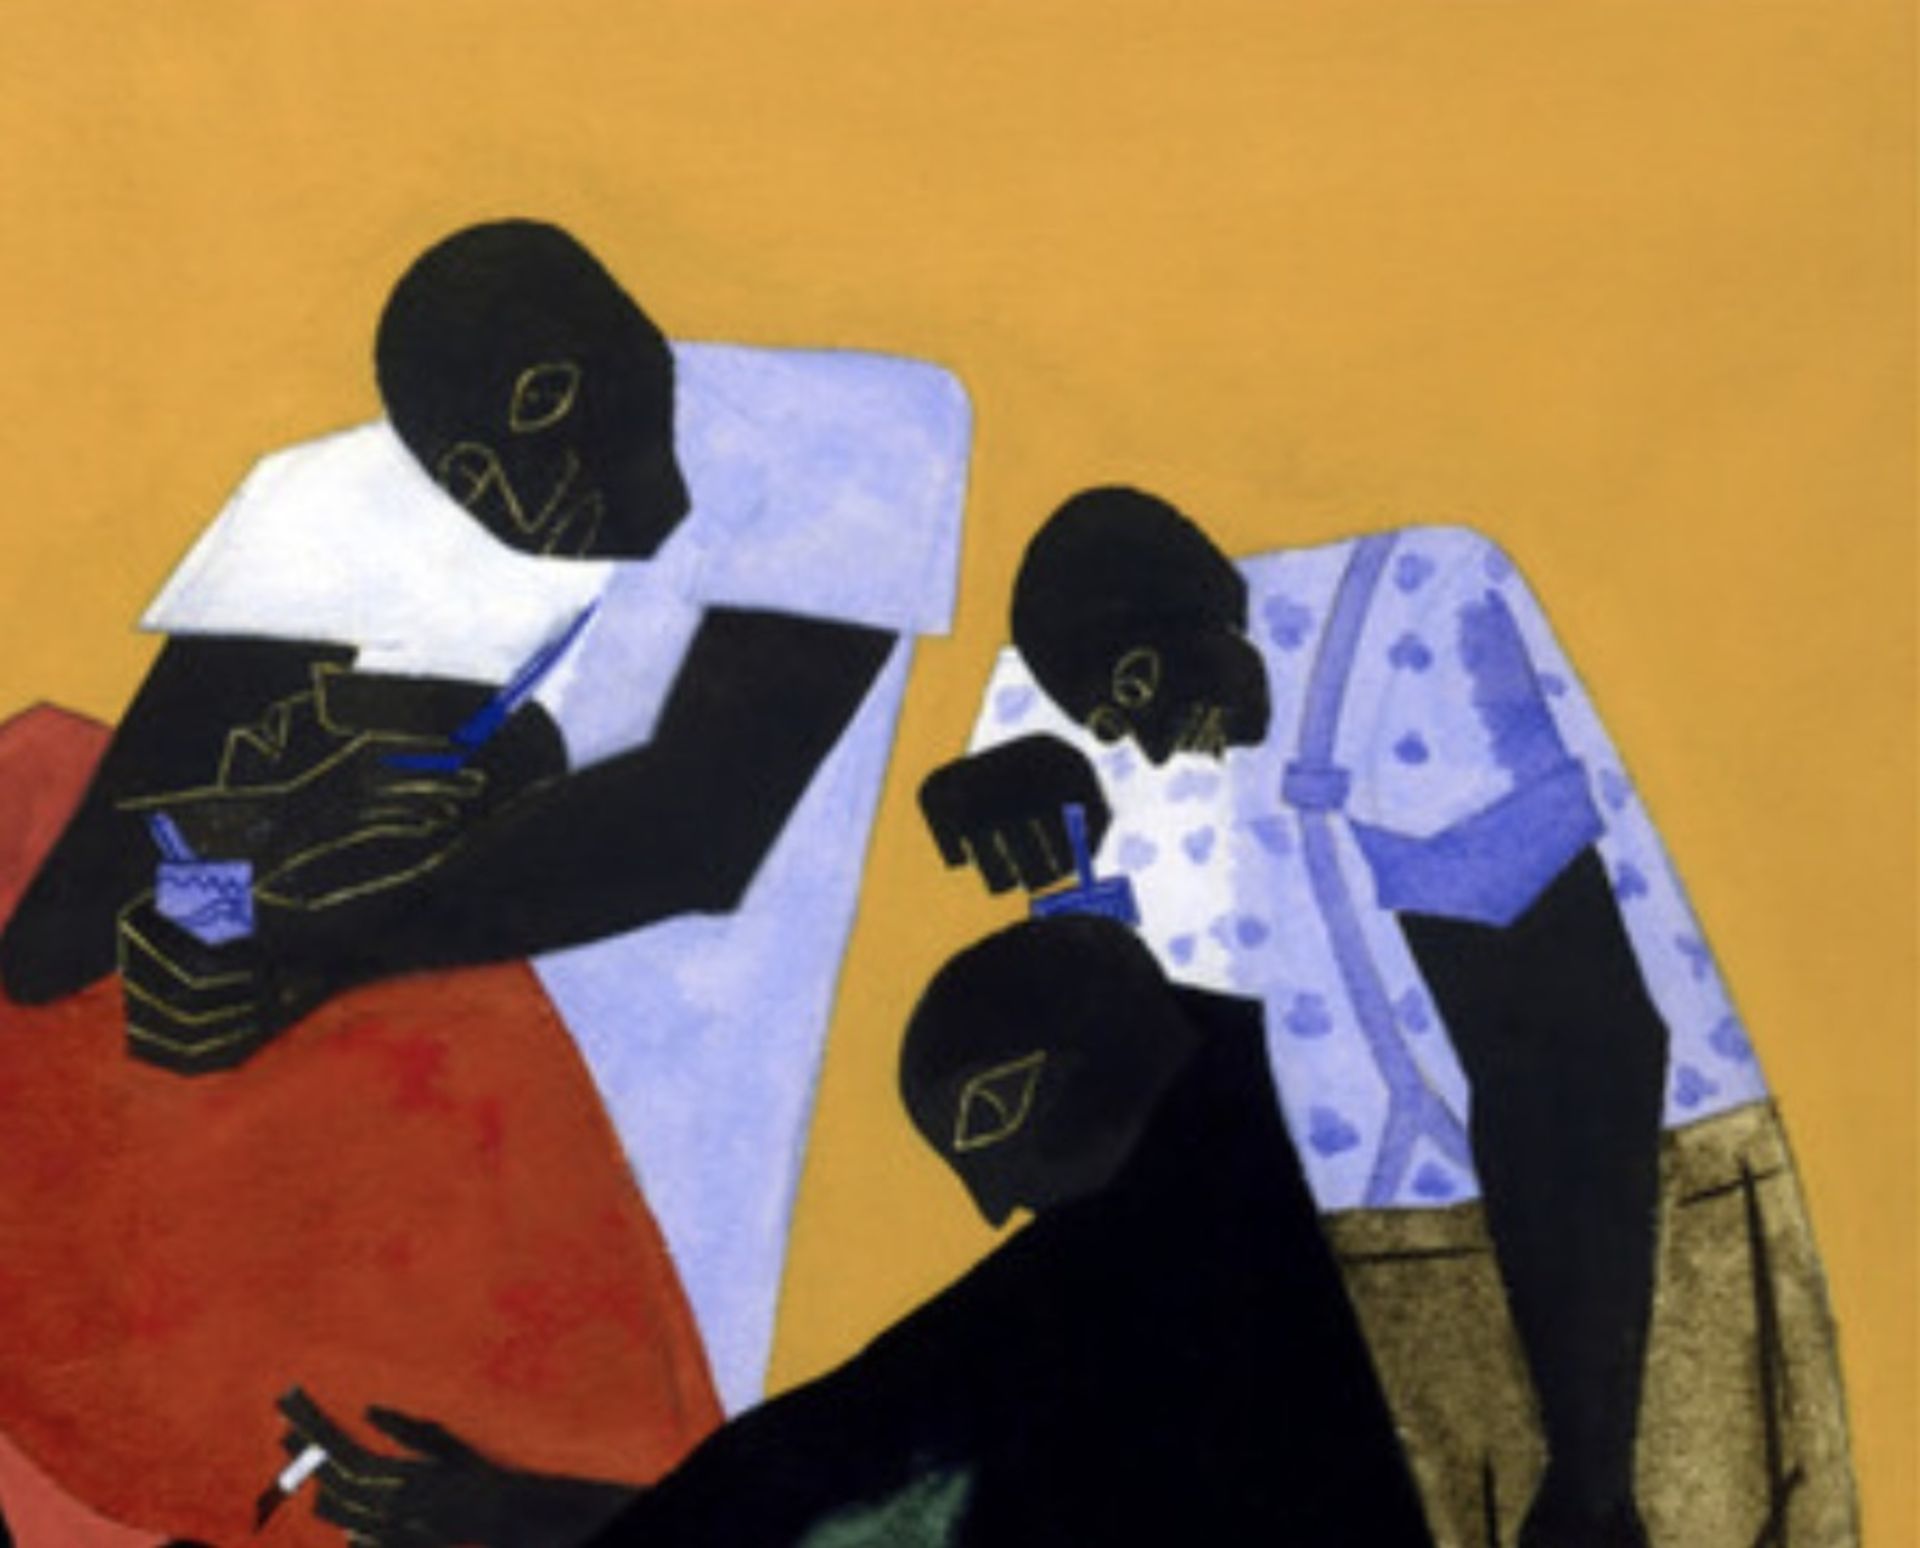 Jacob Lawrence "Barber Shop" Offset Lithograph - Image 4 of 5